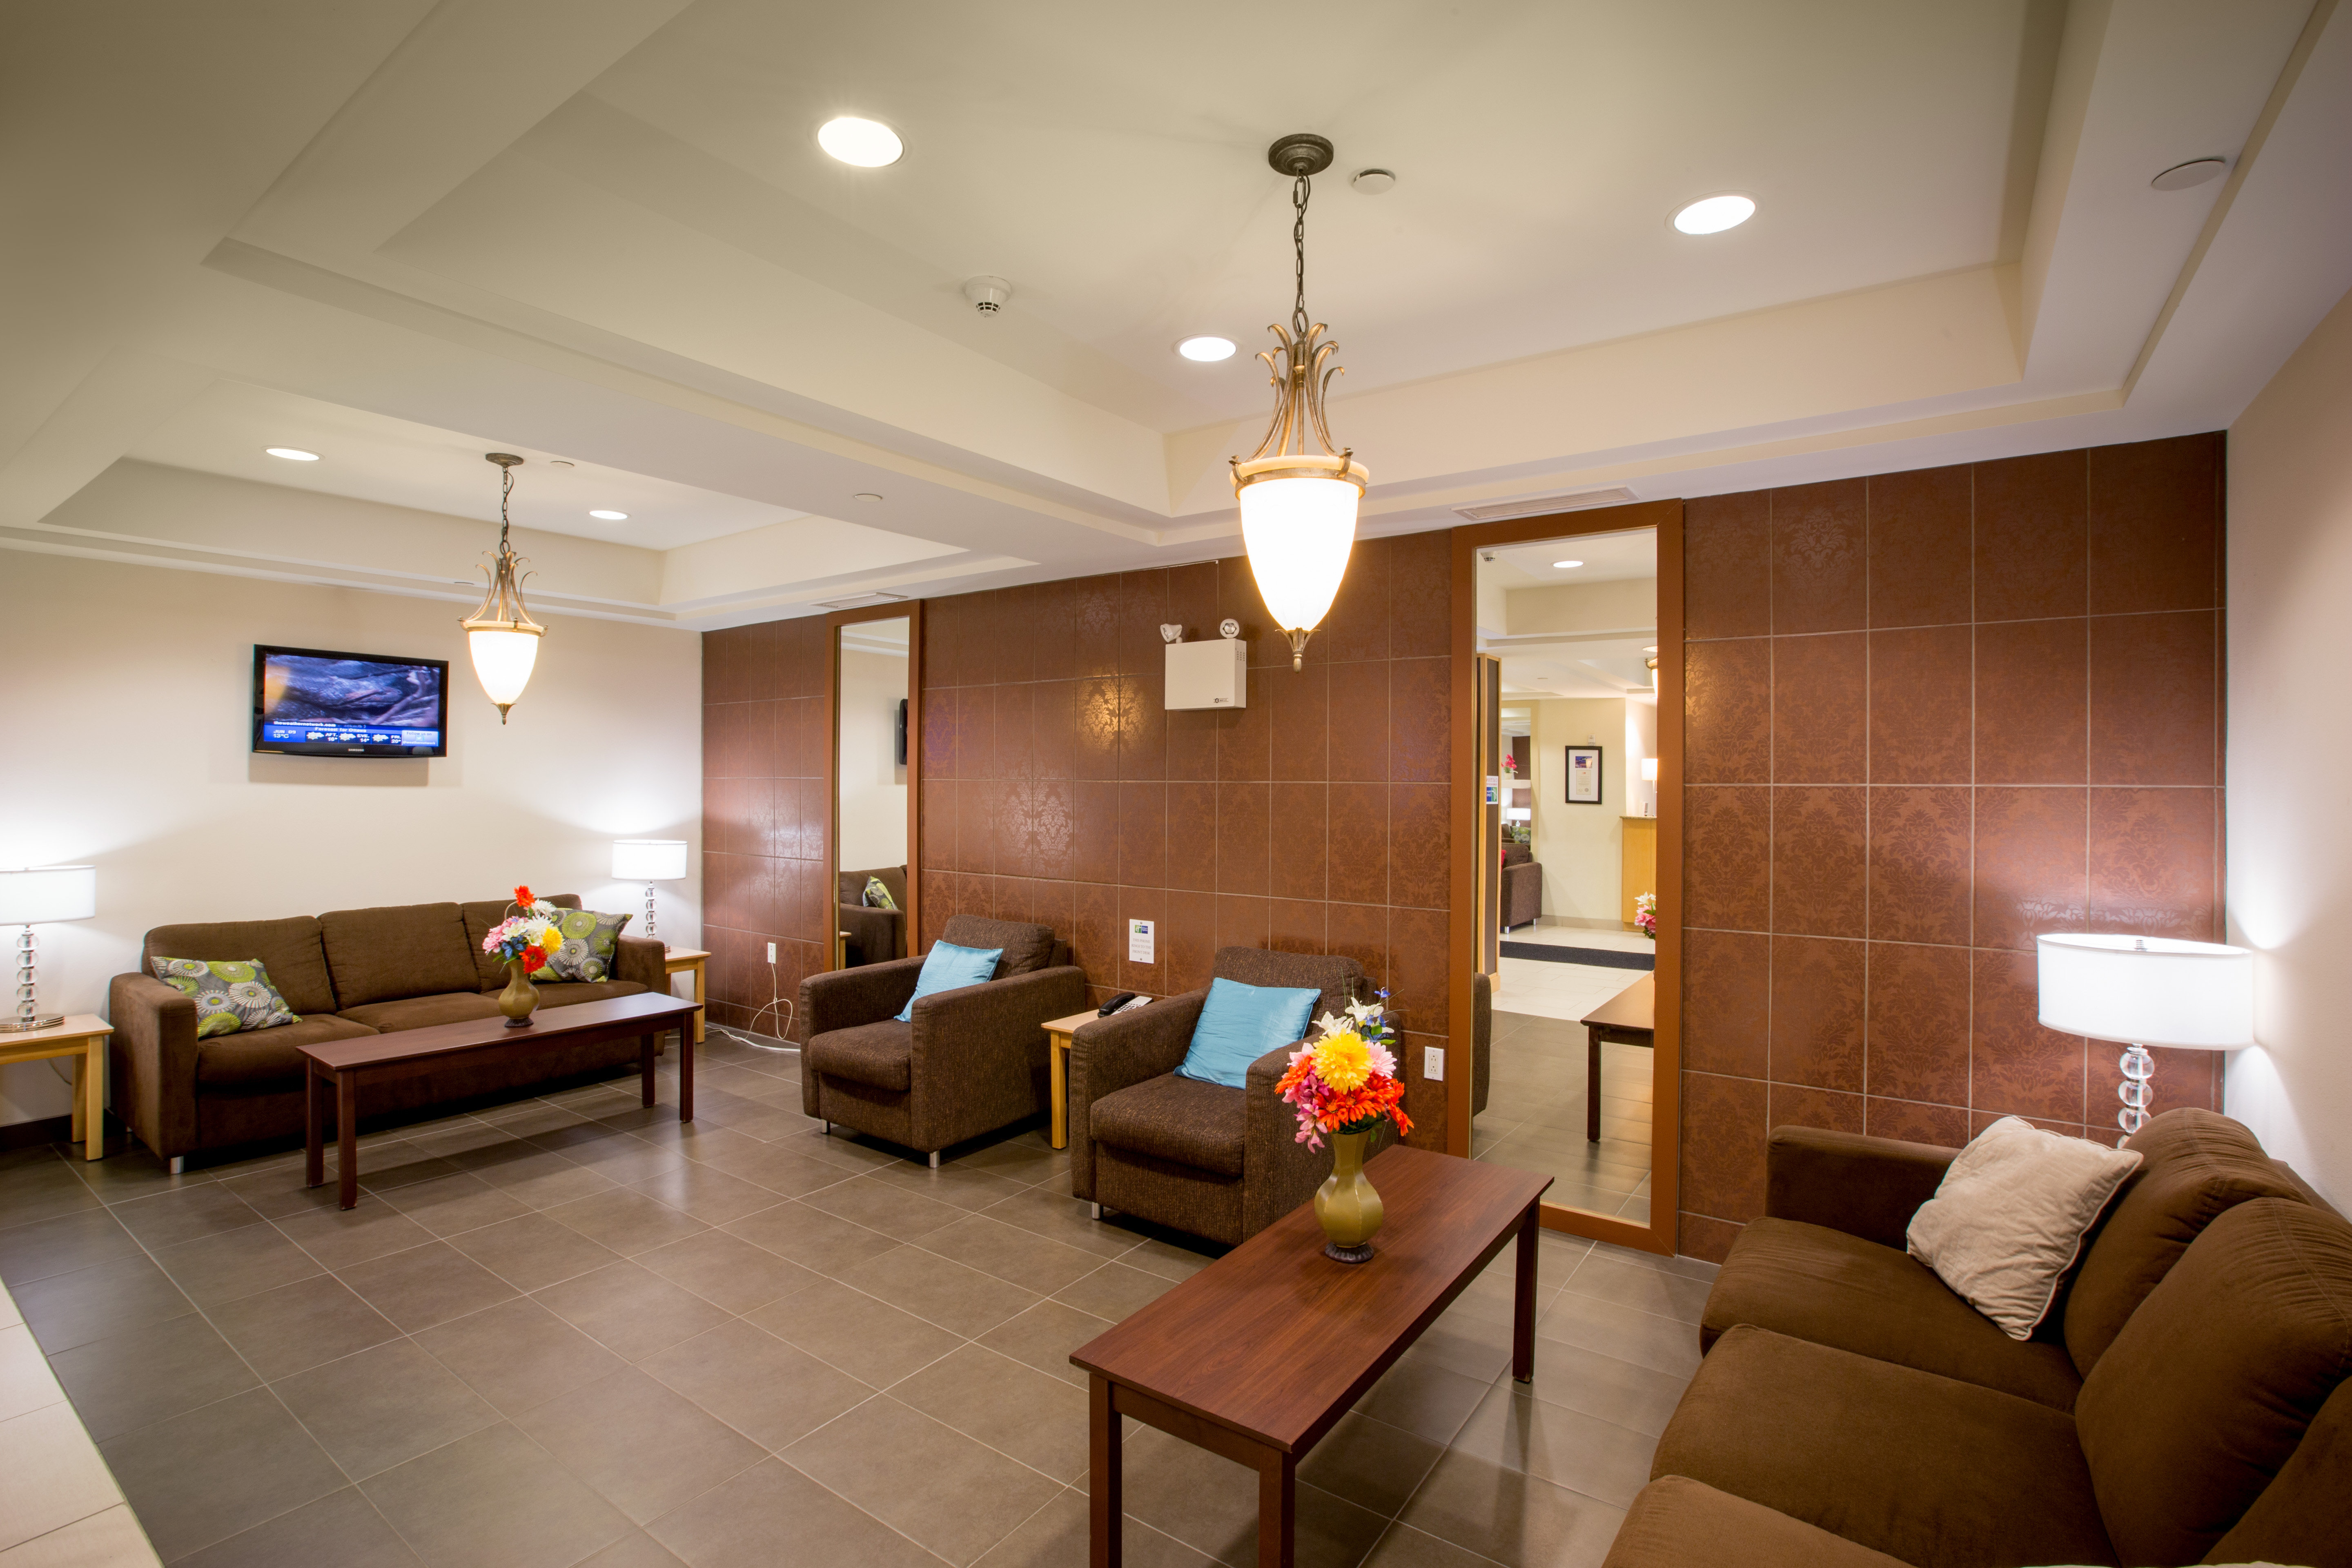 Relax in our warm and welcoming lobby after a long day